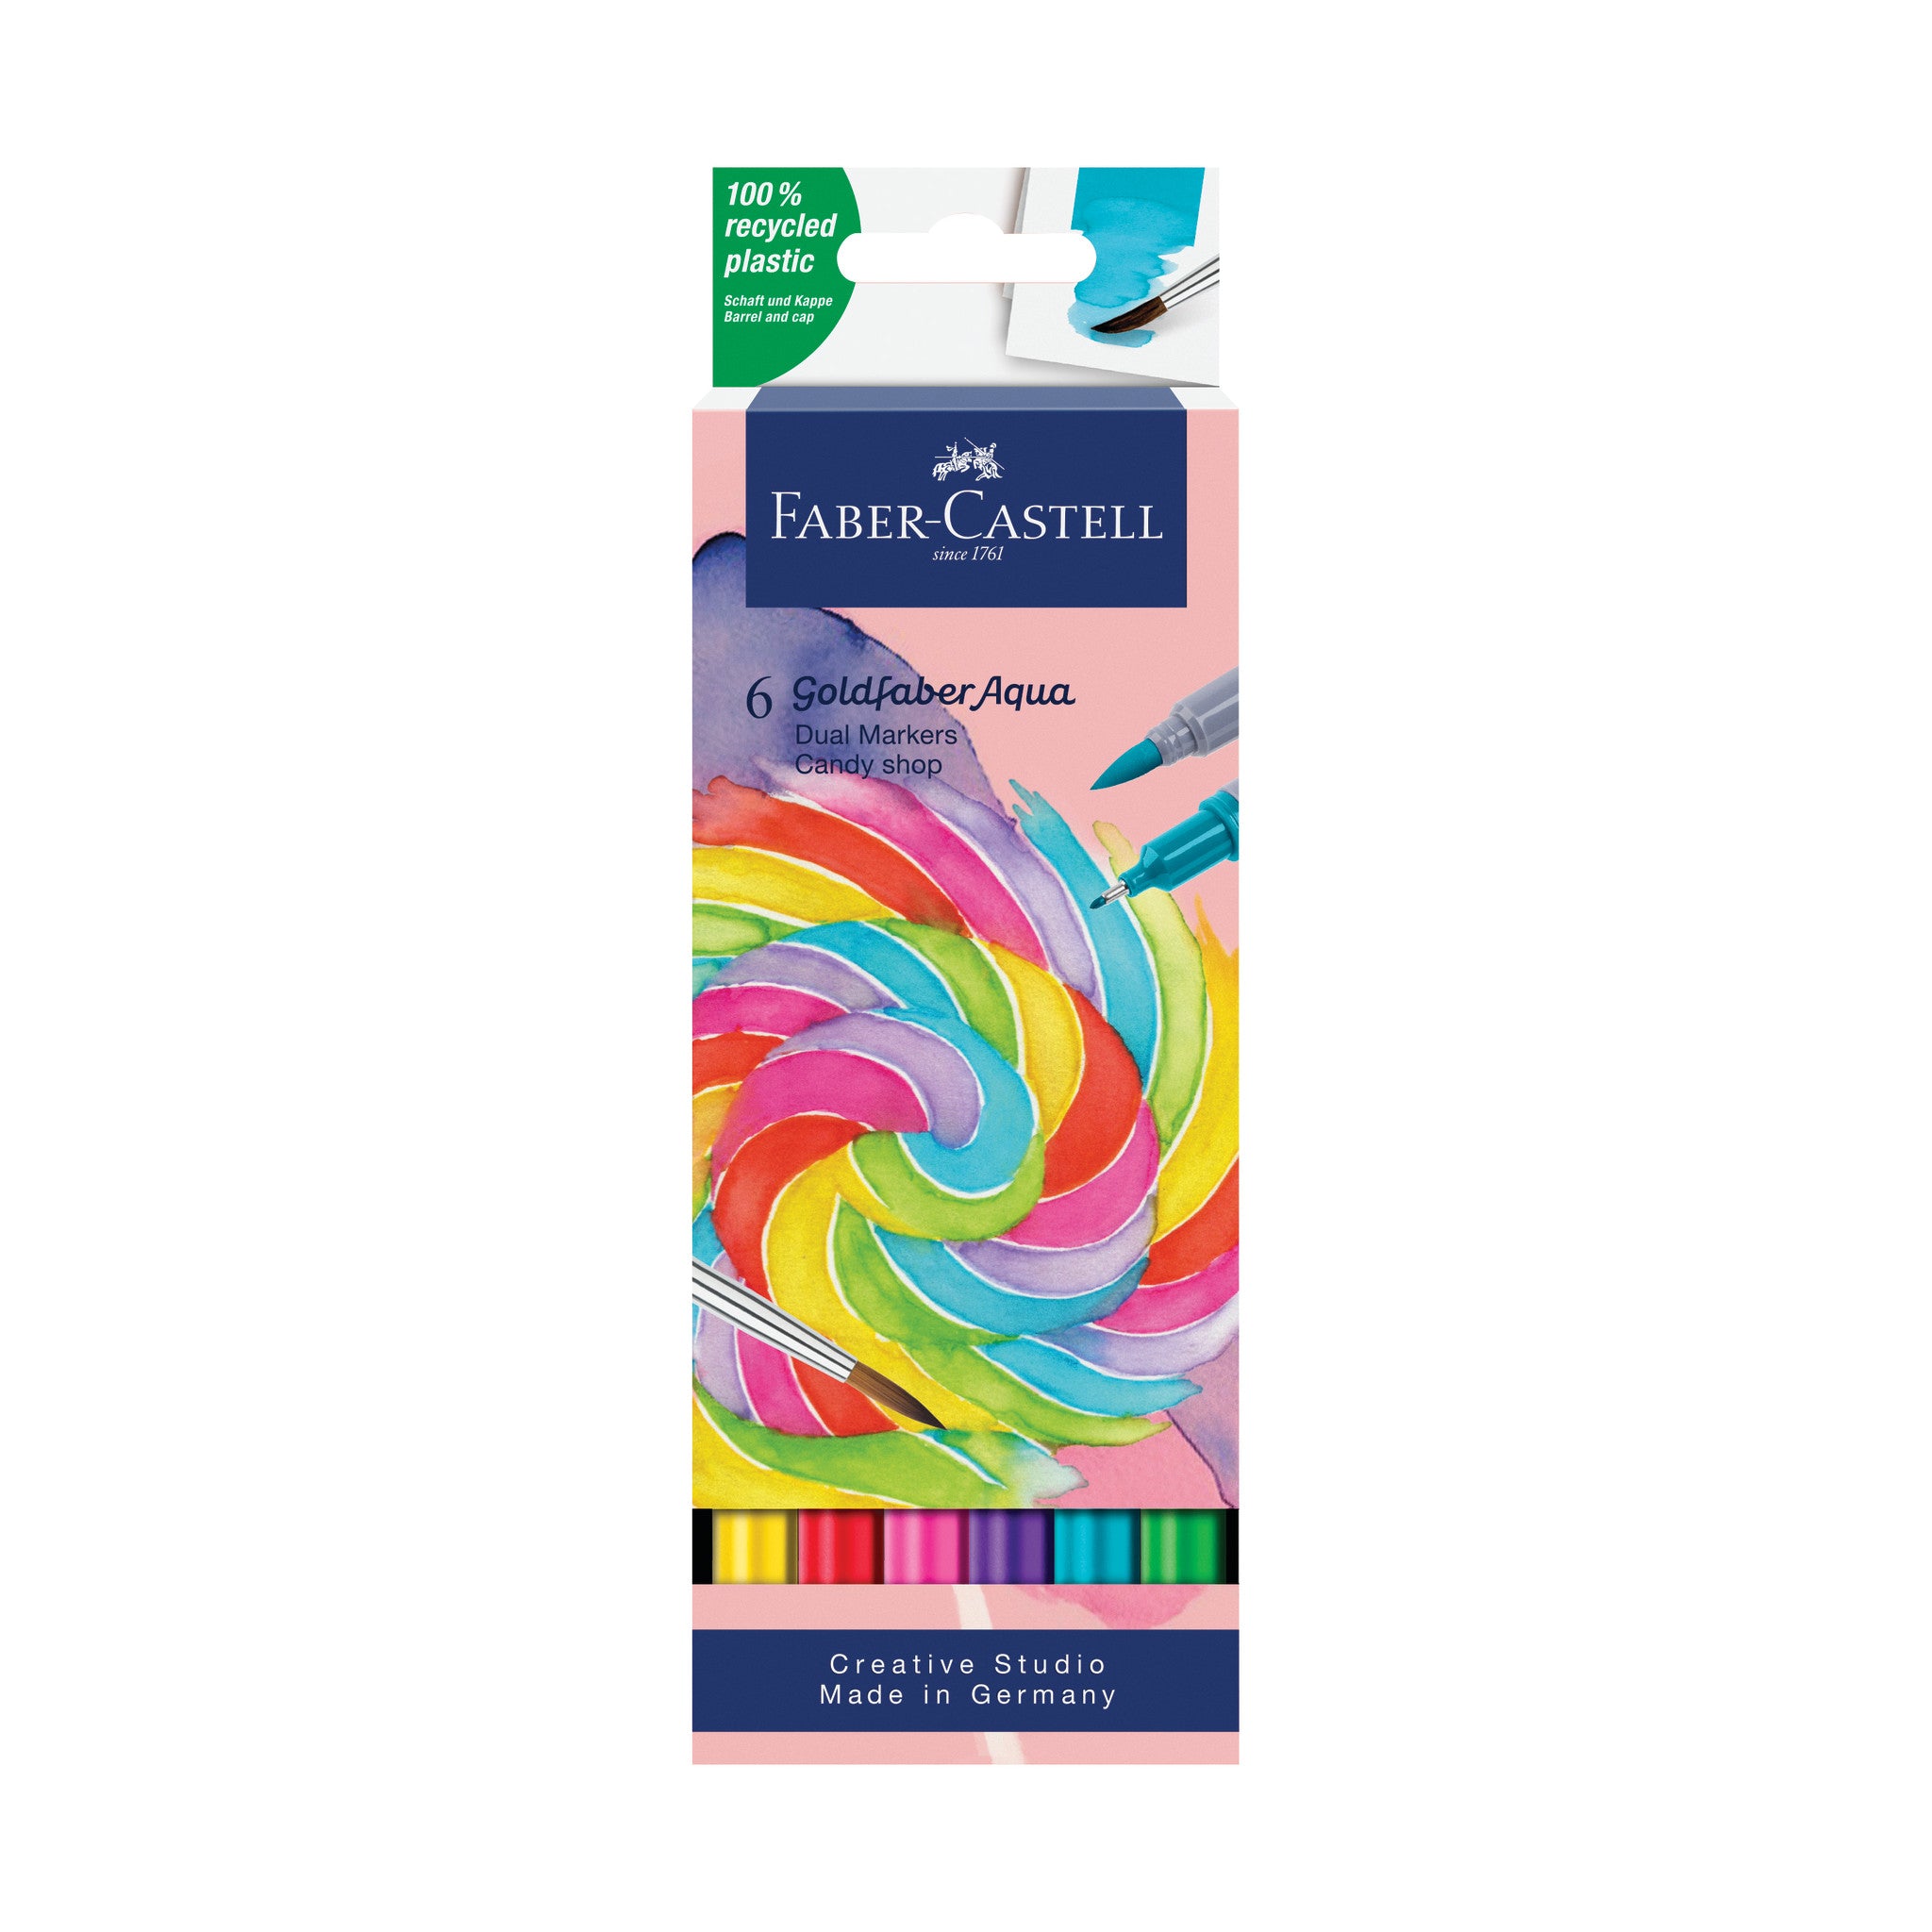 Faber-Castell Watercolor Paint Set With Brush - Premium Washable  Watercolors for Kids, Multicolor, 1 count (pack of 1)